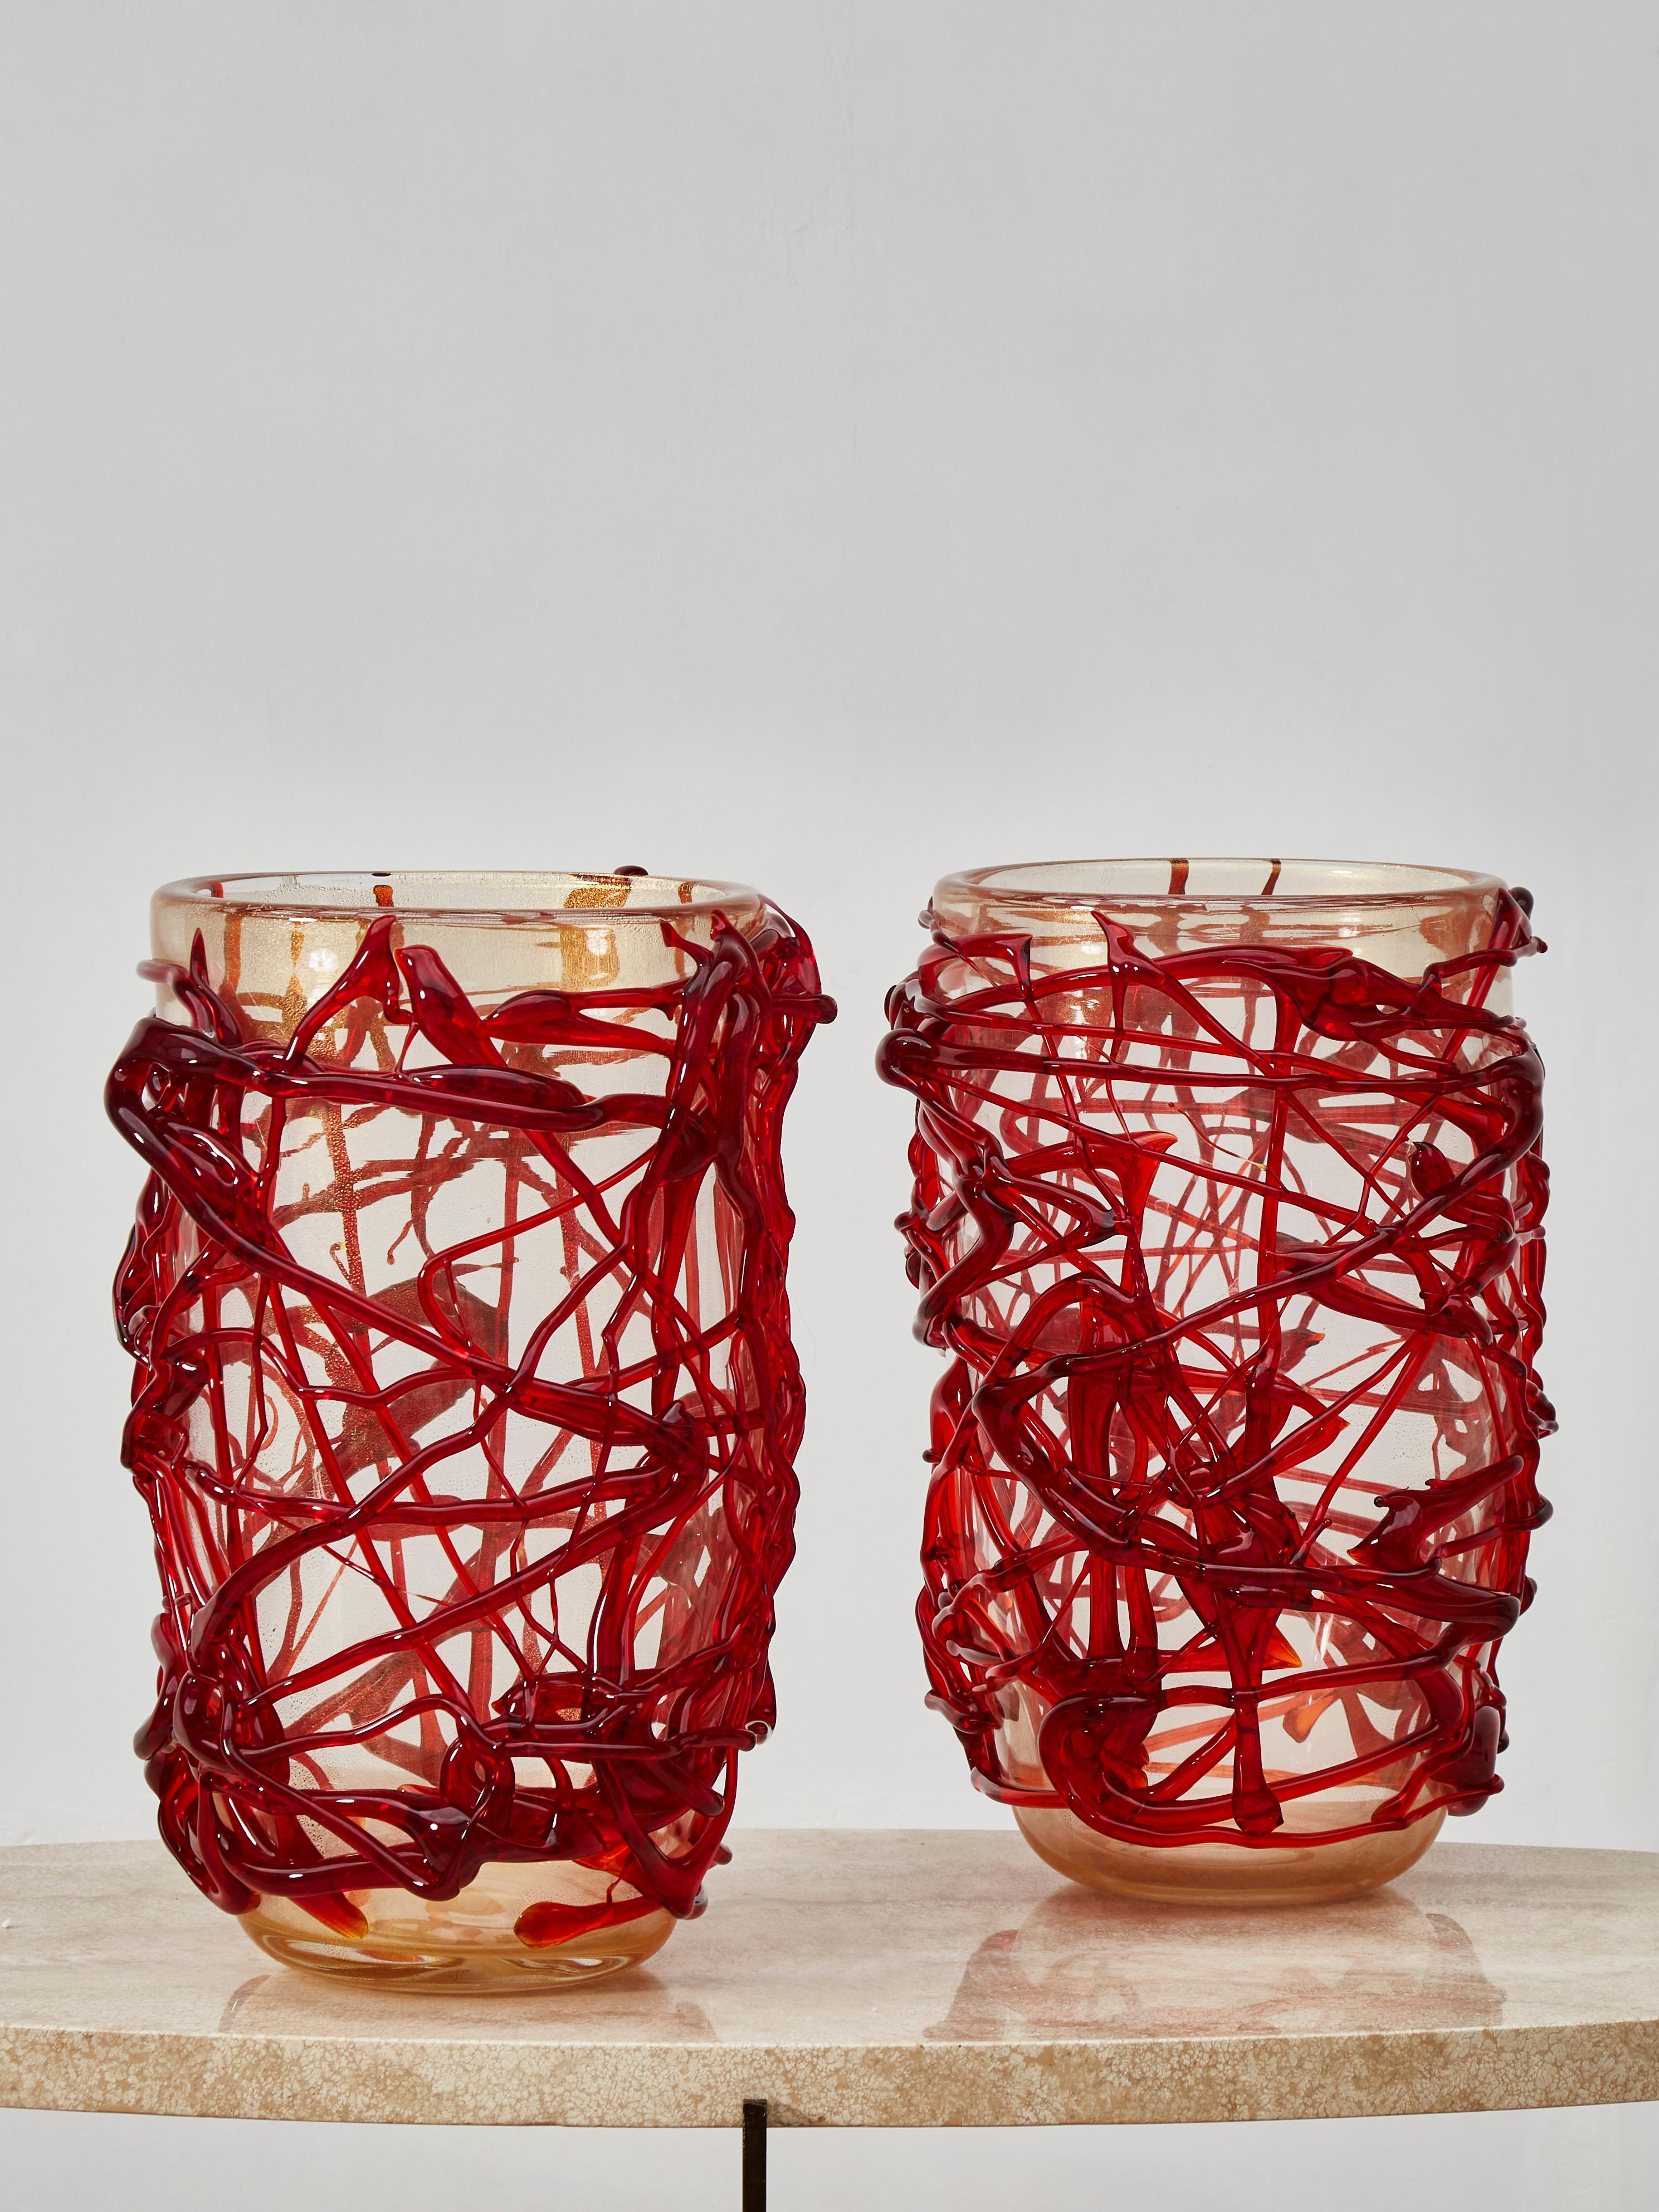 Superb pair of sculpted and red tainted Murano glass.
Creation by Studio Glustin.
Italy, 2021.